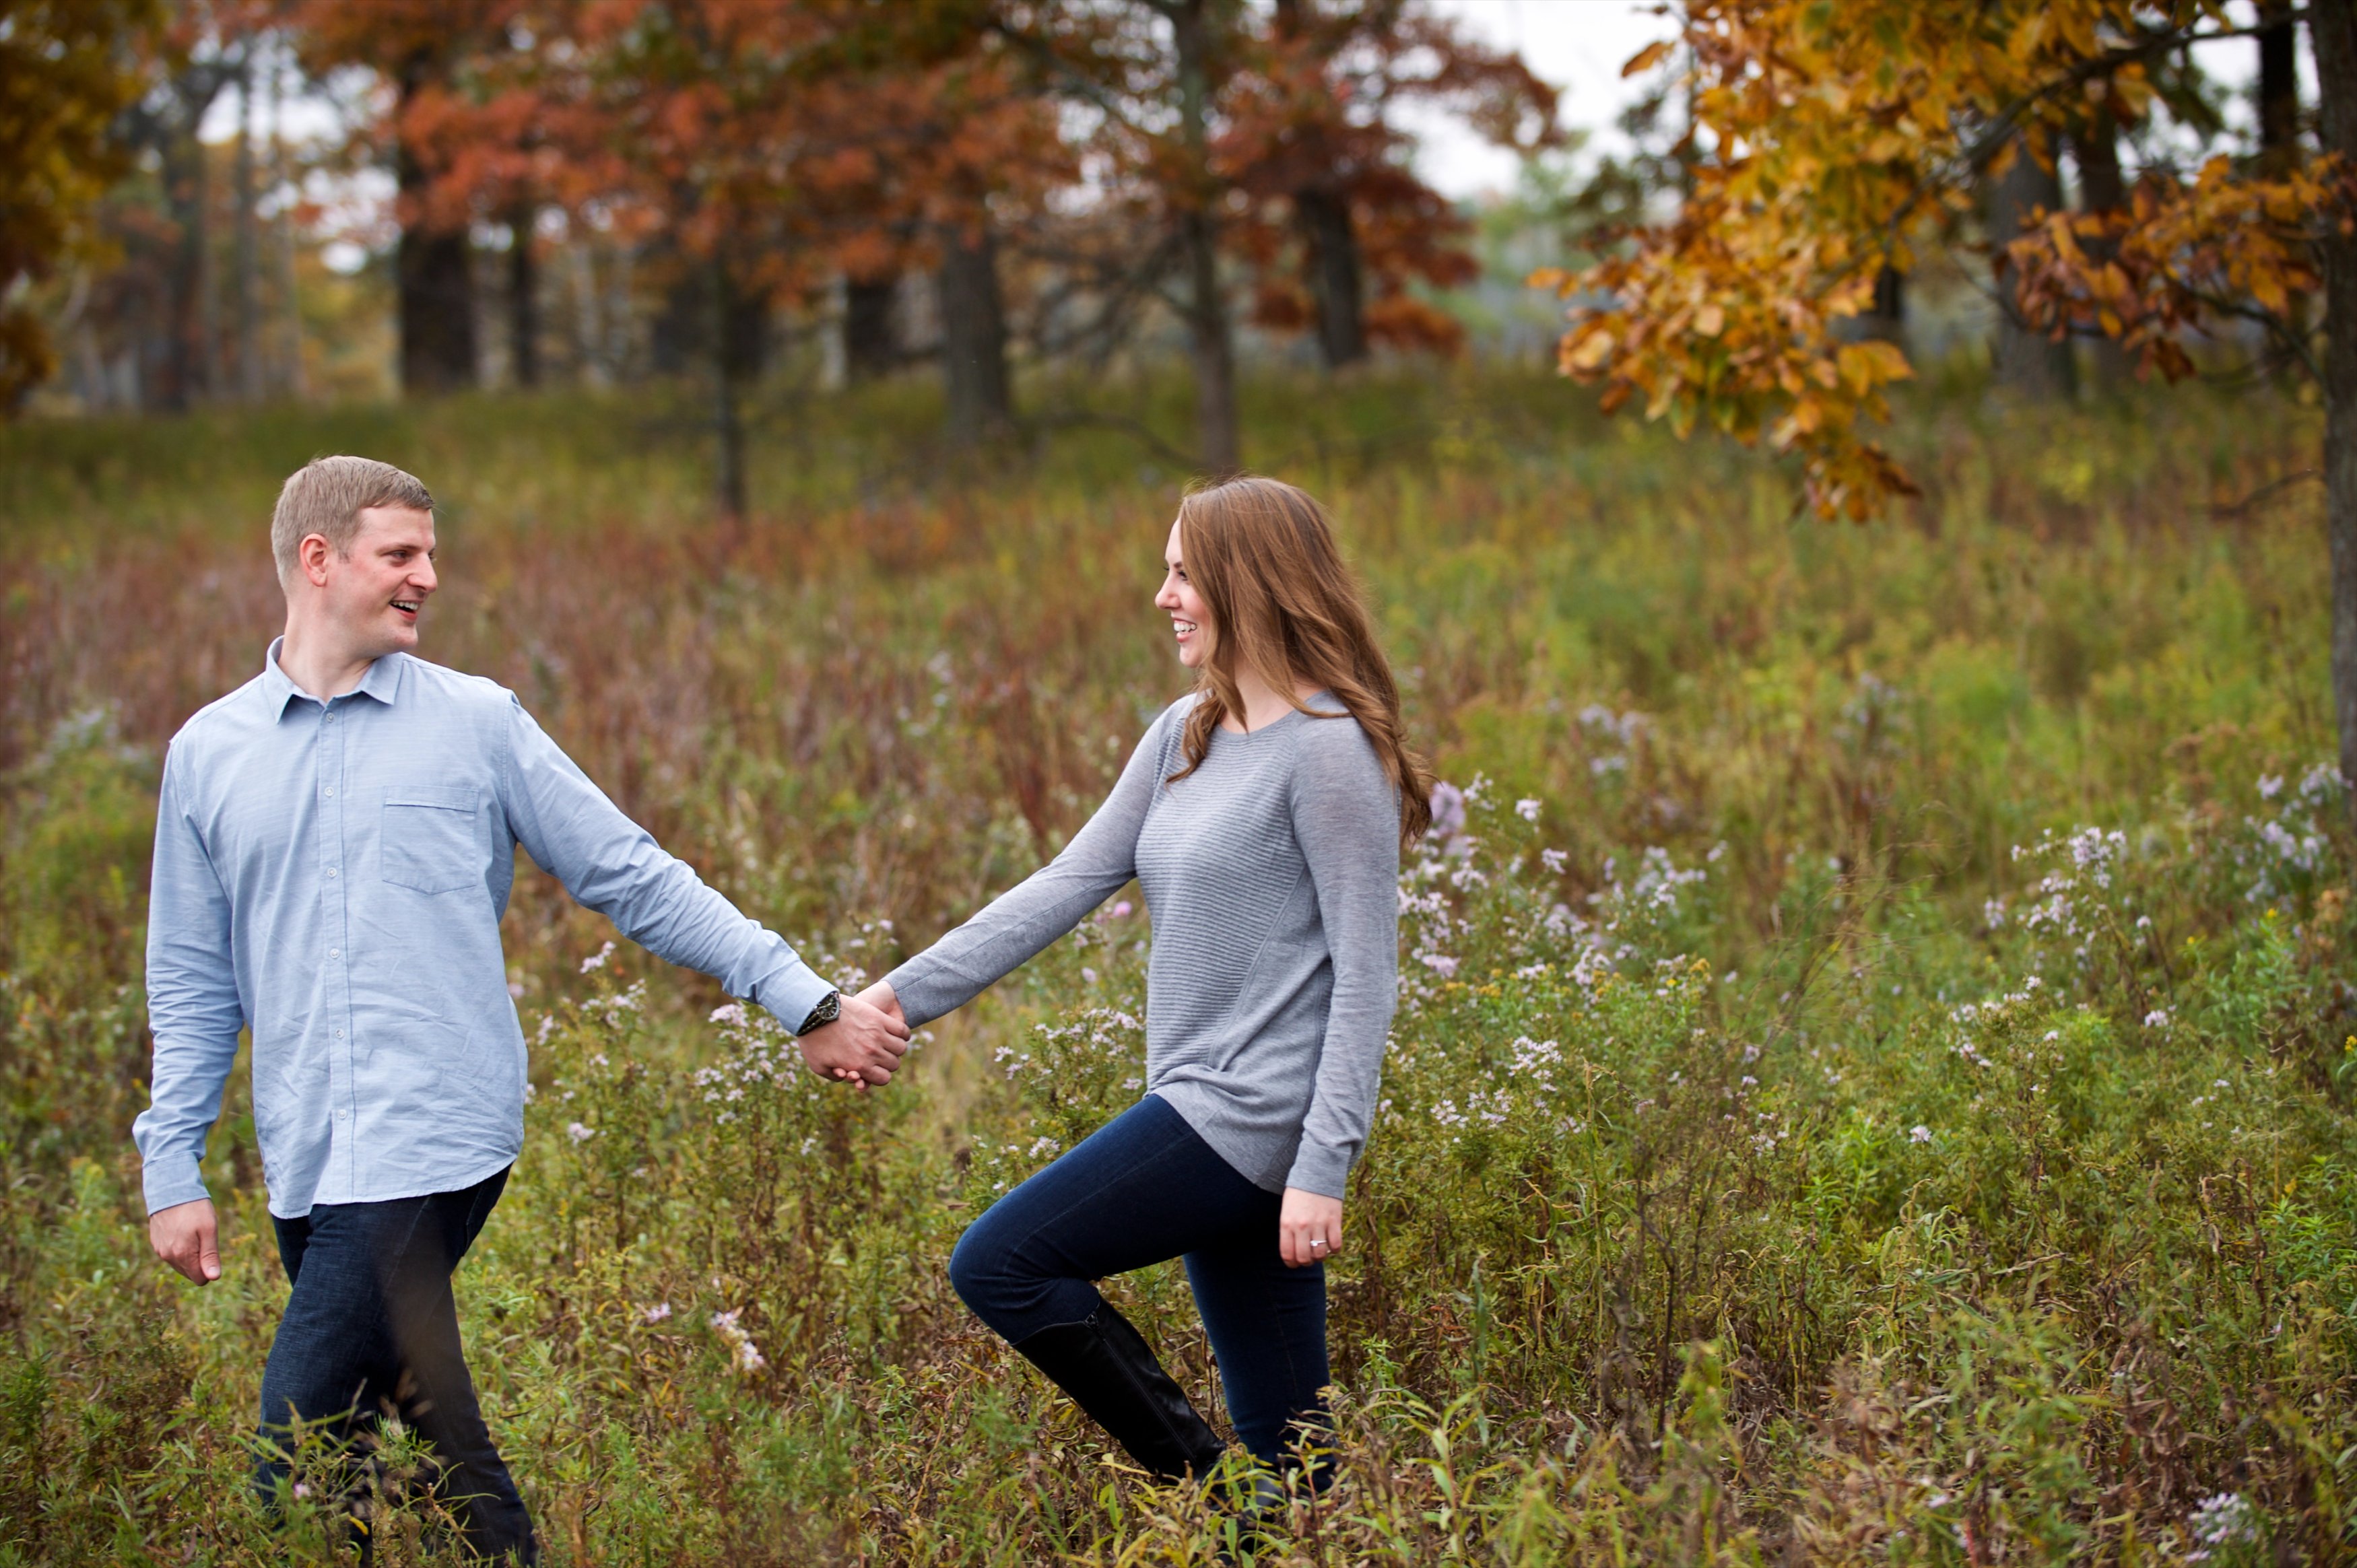 We couldn't be more happy with our gorgeous engagement photos by Beale and Wittig! These are perfect fall engagement photos with the fall colors looking so beautiful. Check them out for some engagement photo ideas! 